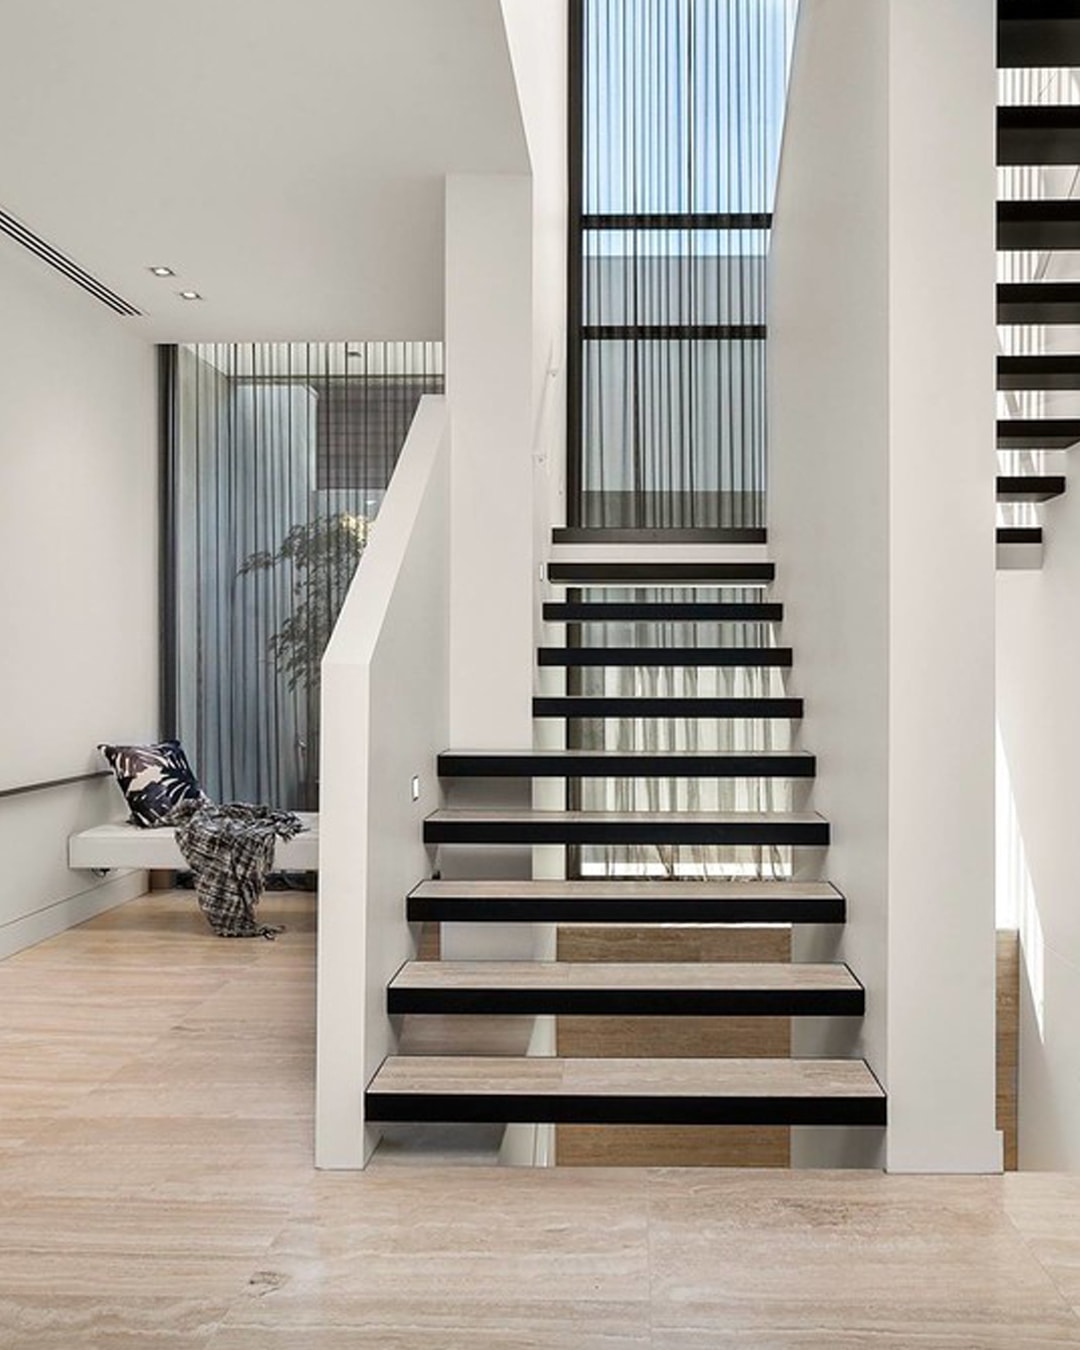 Paglierino Staircase - RMS Natural Stone and Ceramics